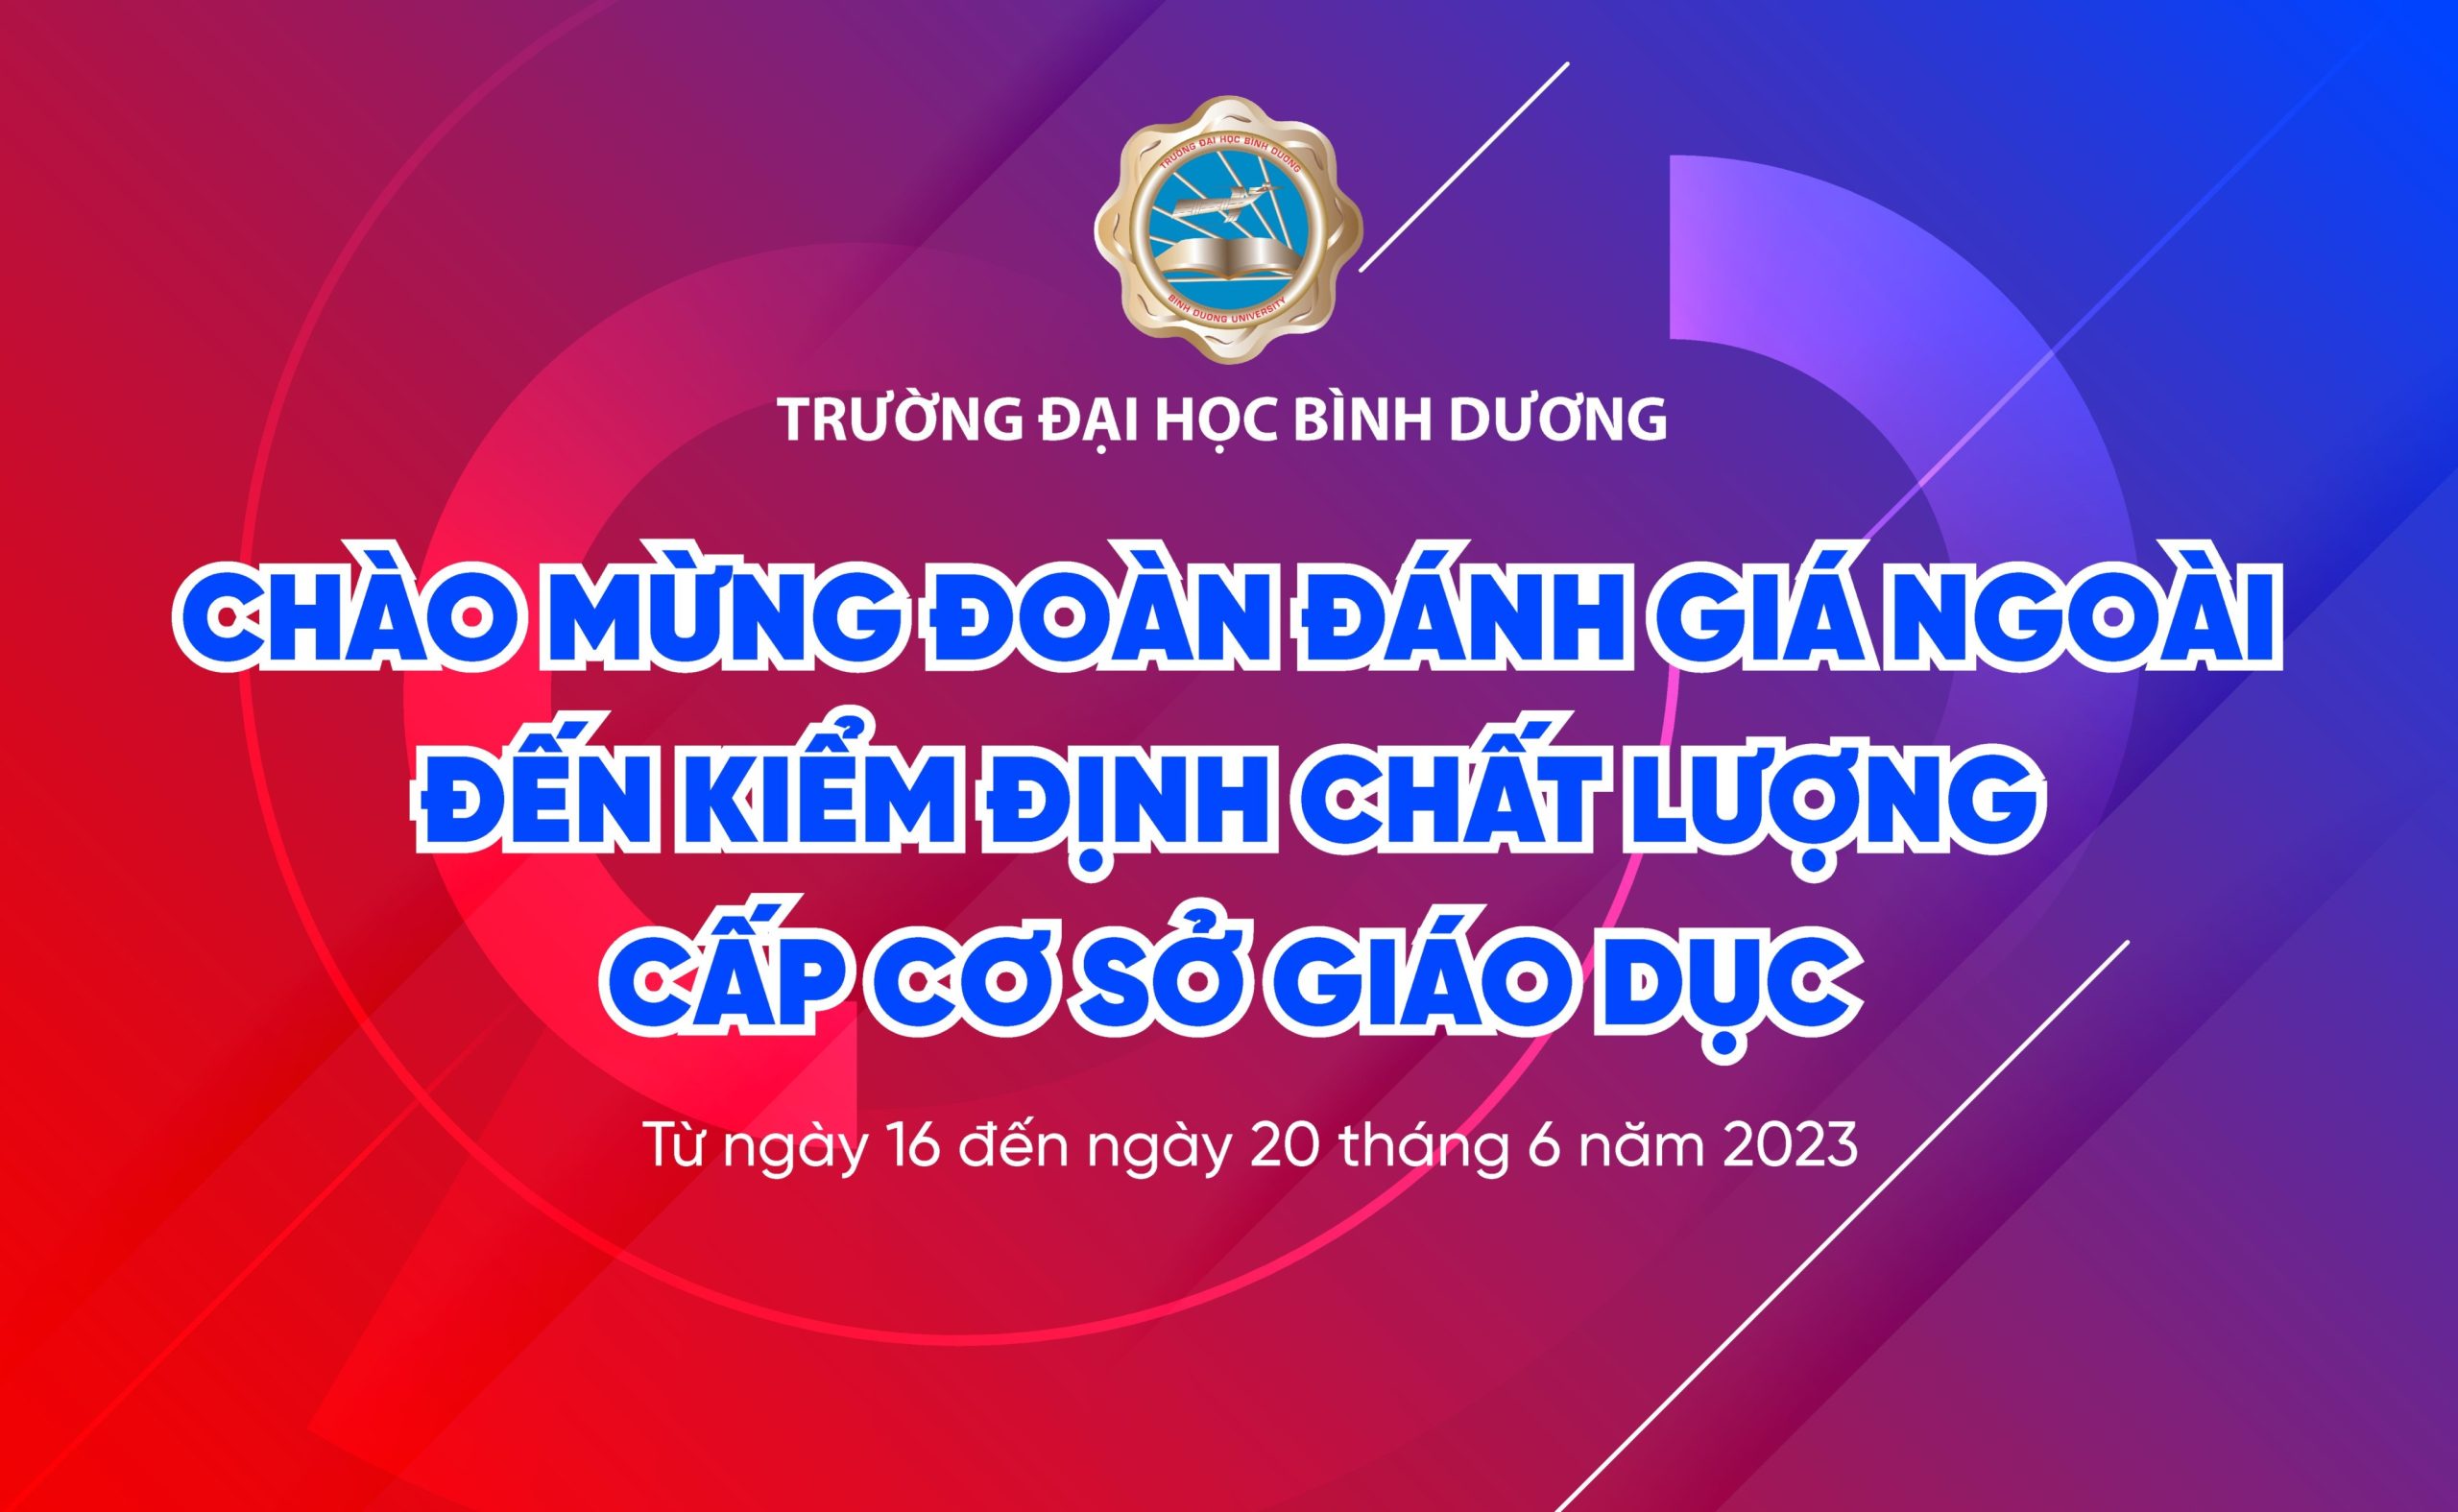 chao mung kiem dinh scaled 1